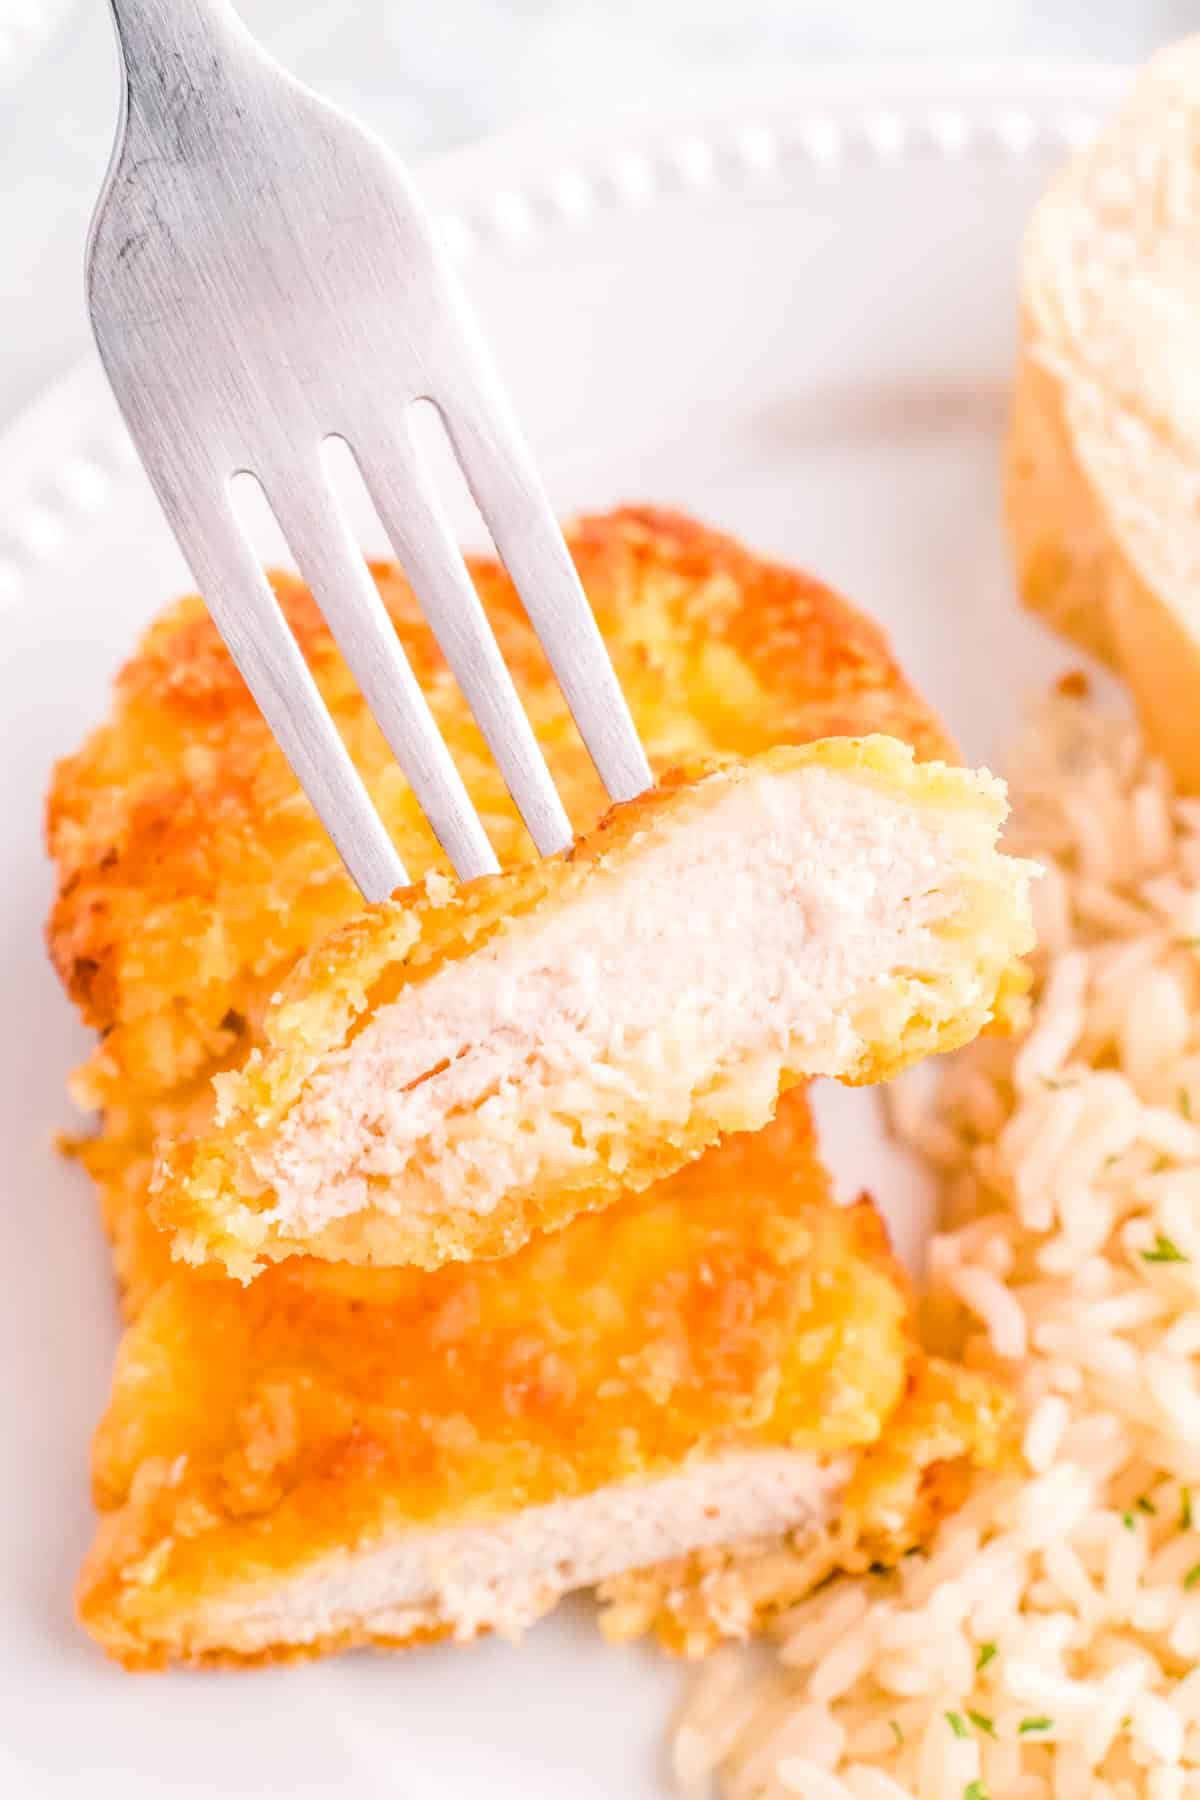 A look inside a Baked Breaded Chicken Recipe that has been cut into.